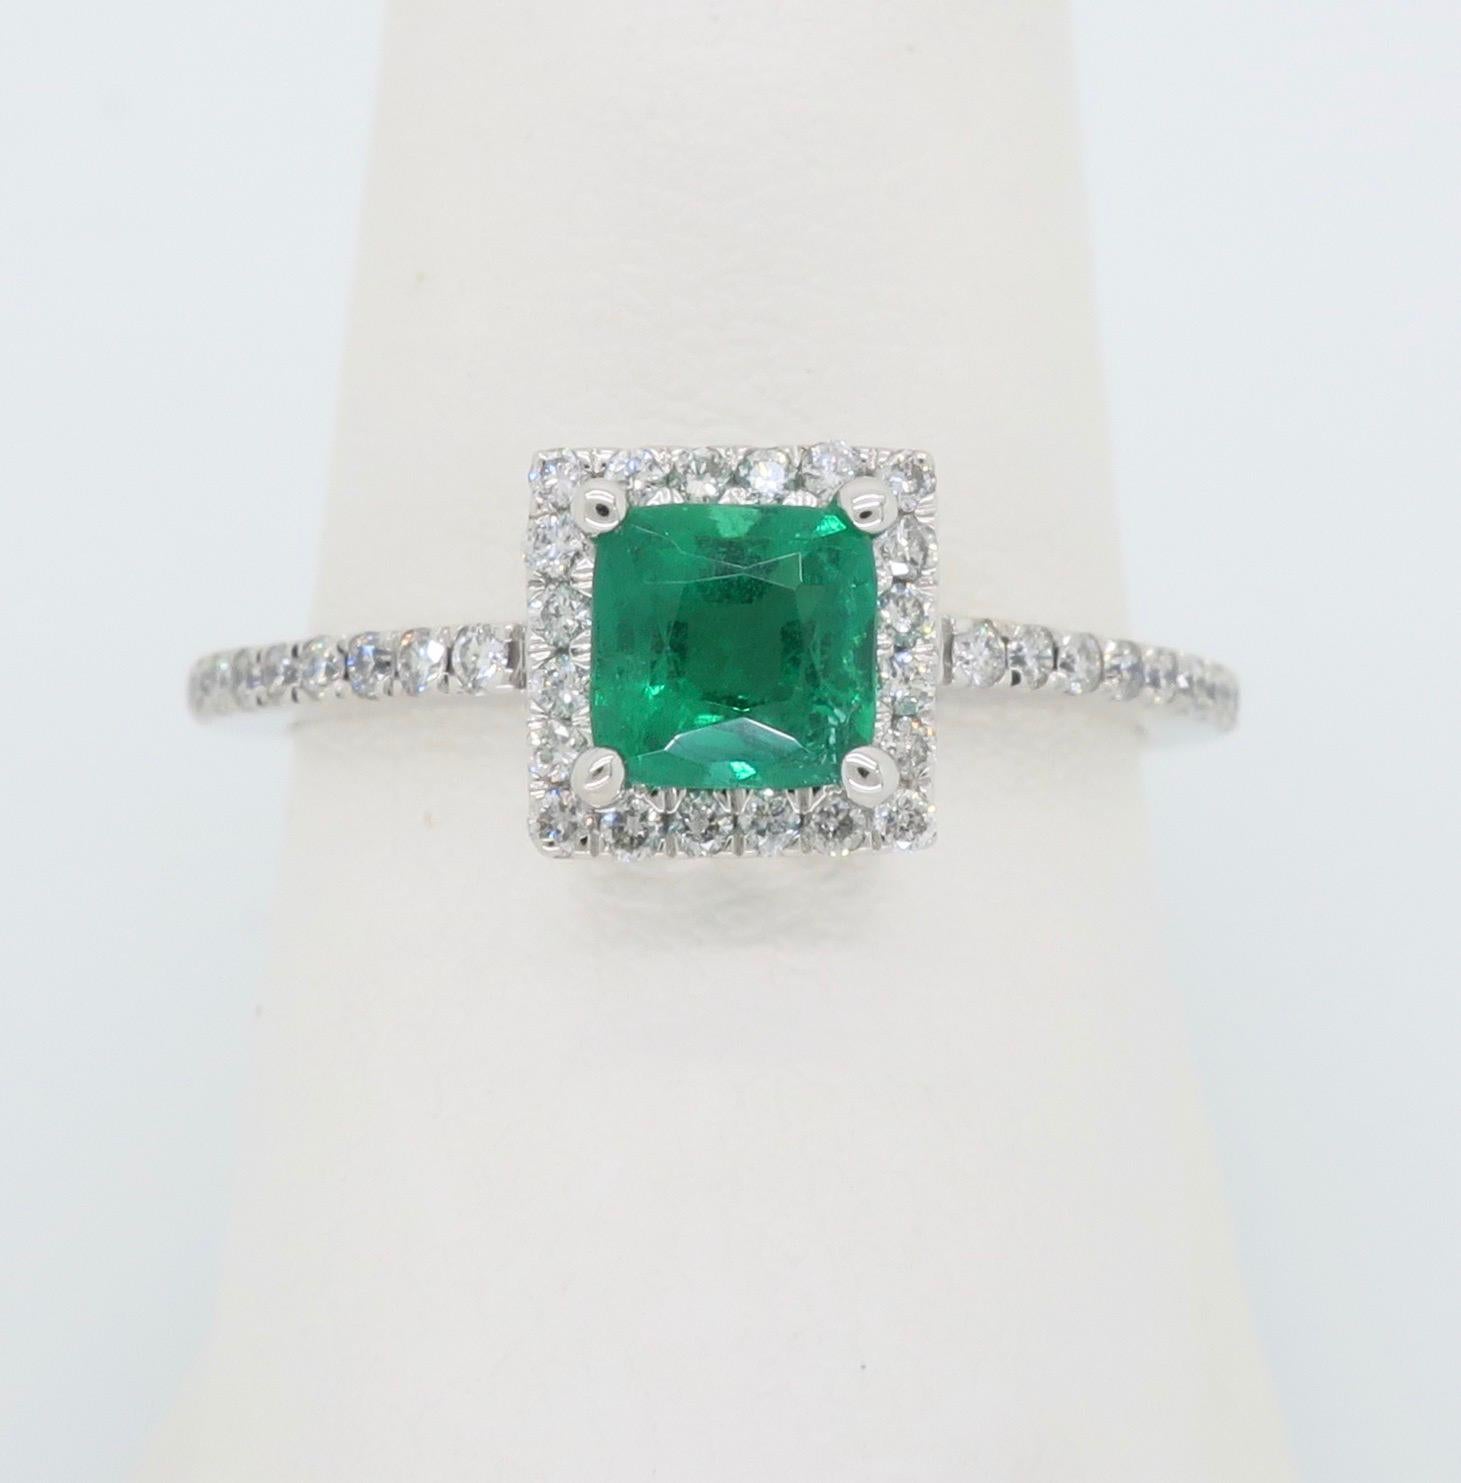 Emerald and diamond halo style ring crafted in 14k white gold. 

Gemstone: Emerald & Diamonds
Gemstone Carat Weight:  Approximately .70CT 
Diamond Carat Weight:  Approximately .27CTW
Diamond Cut: Round Brilliant Cut
Color: Average G-I 
Clarity: